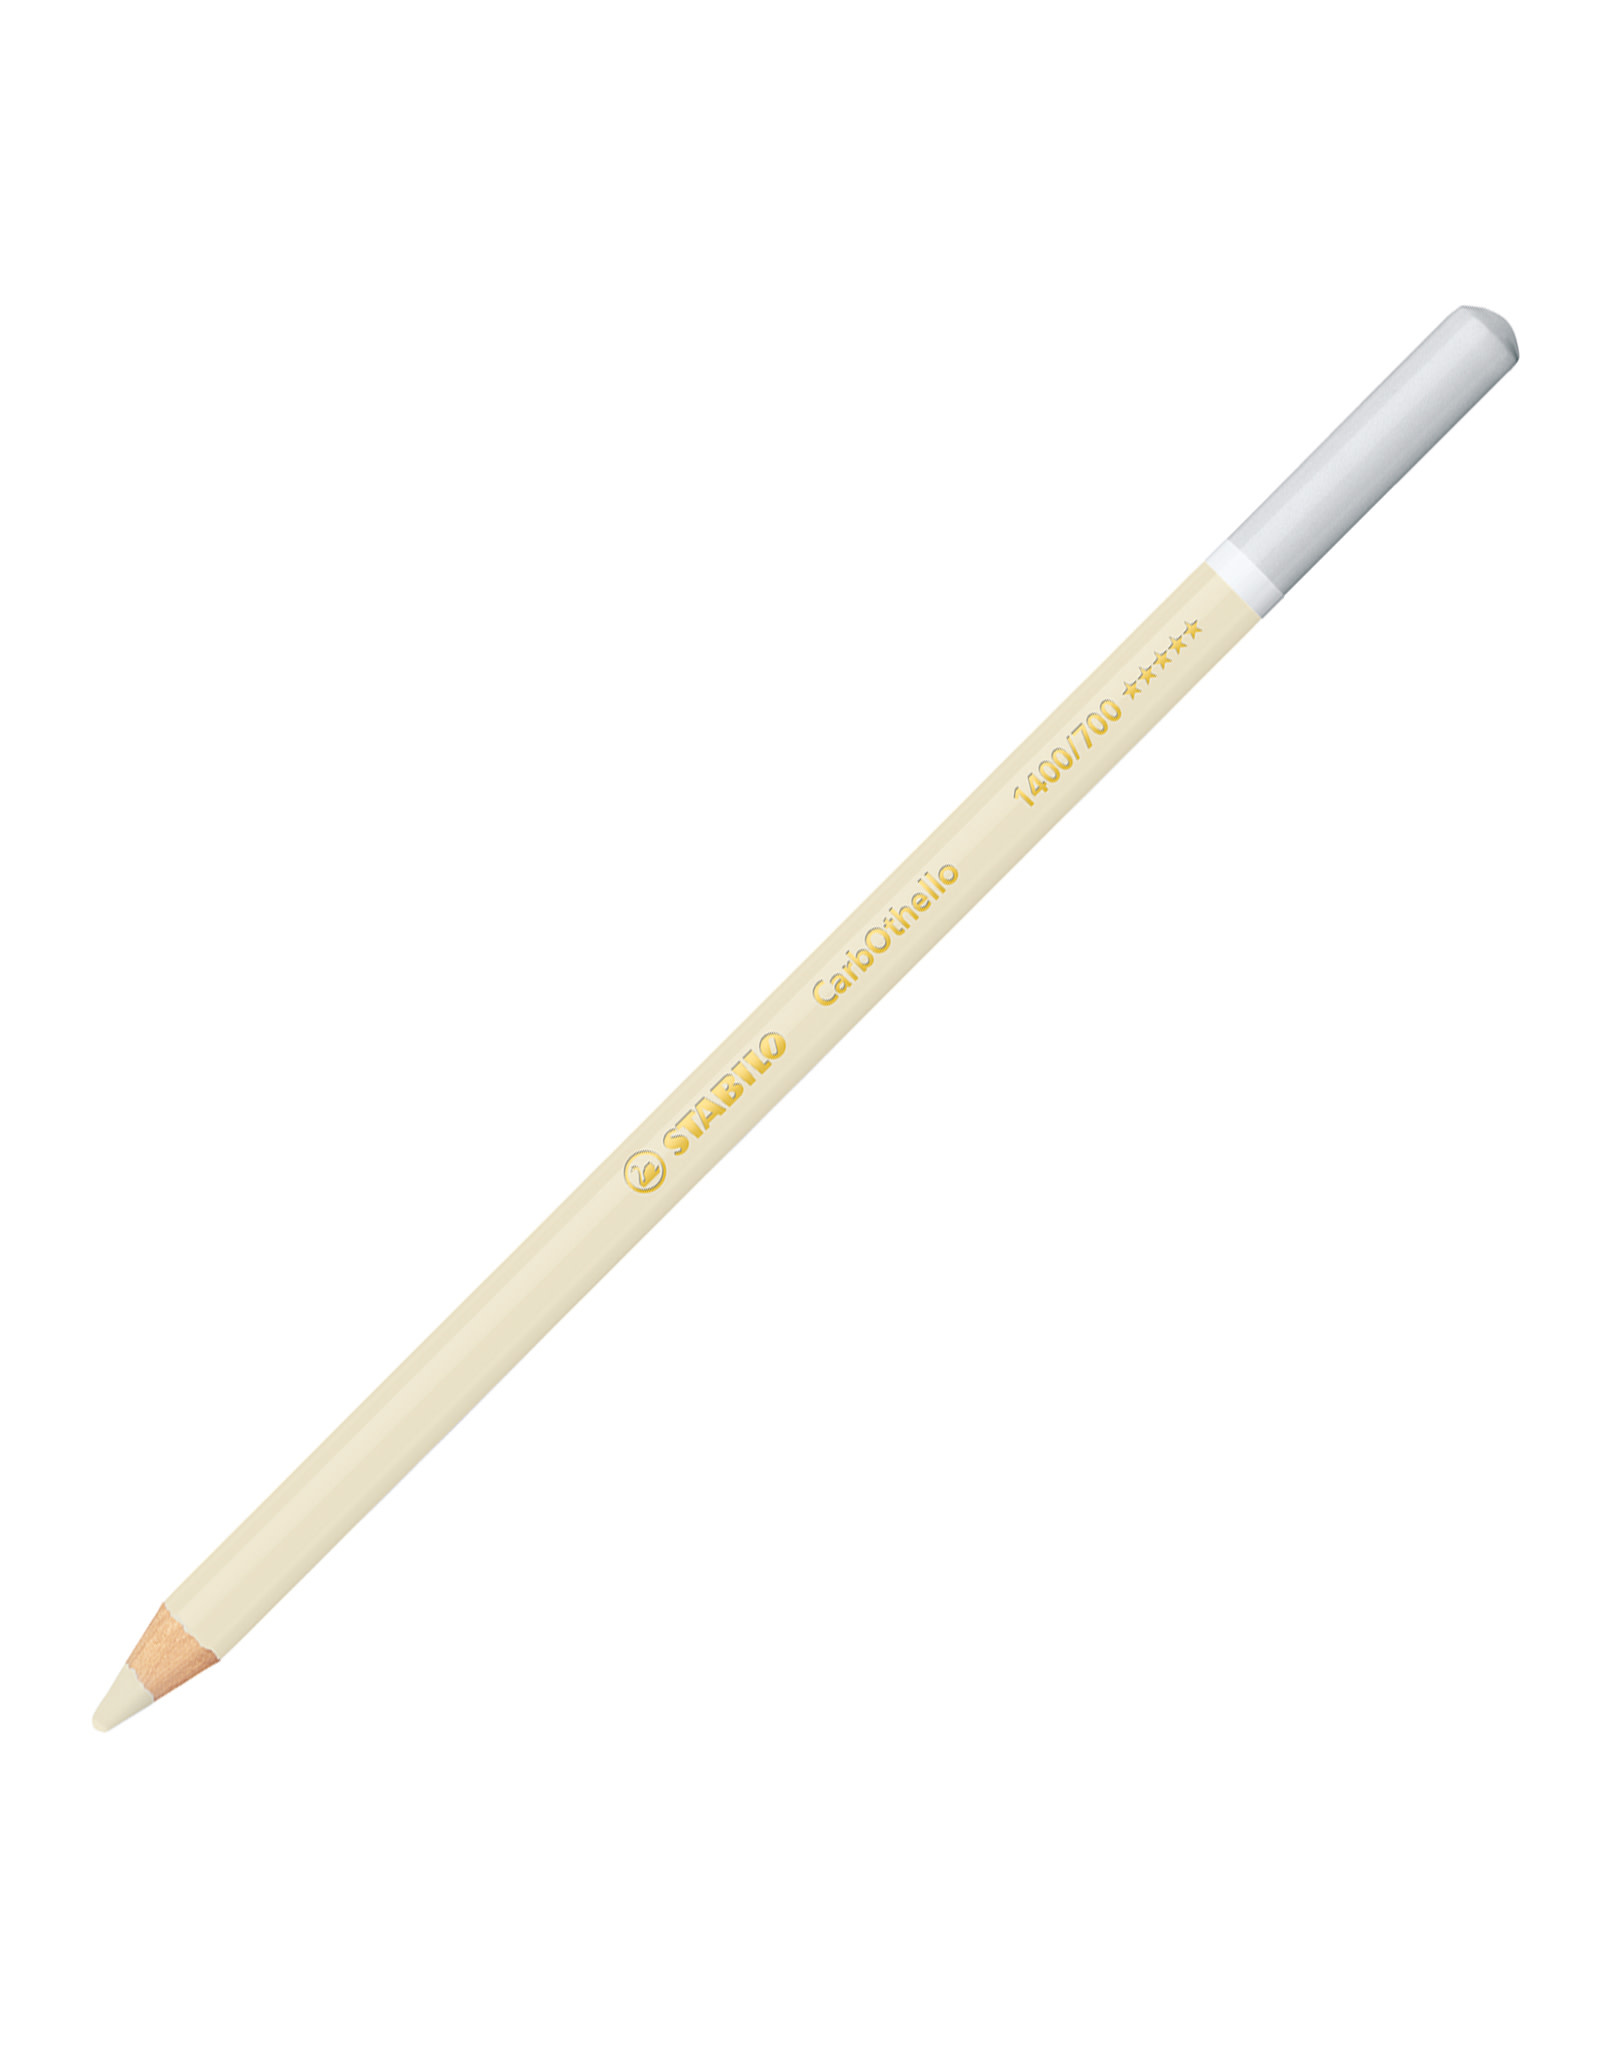 Stabilo Carbothello Pencil Warm Gray 1 - The Art Store/Commercial Art Supply